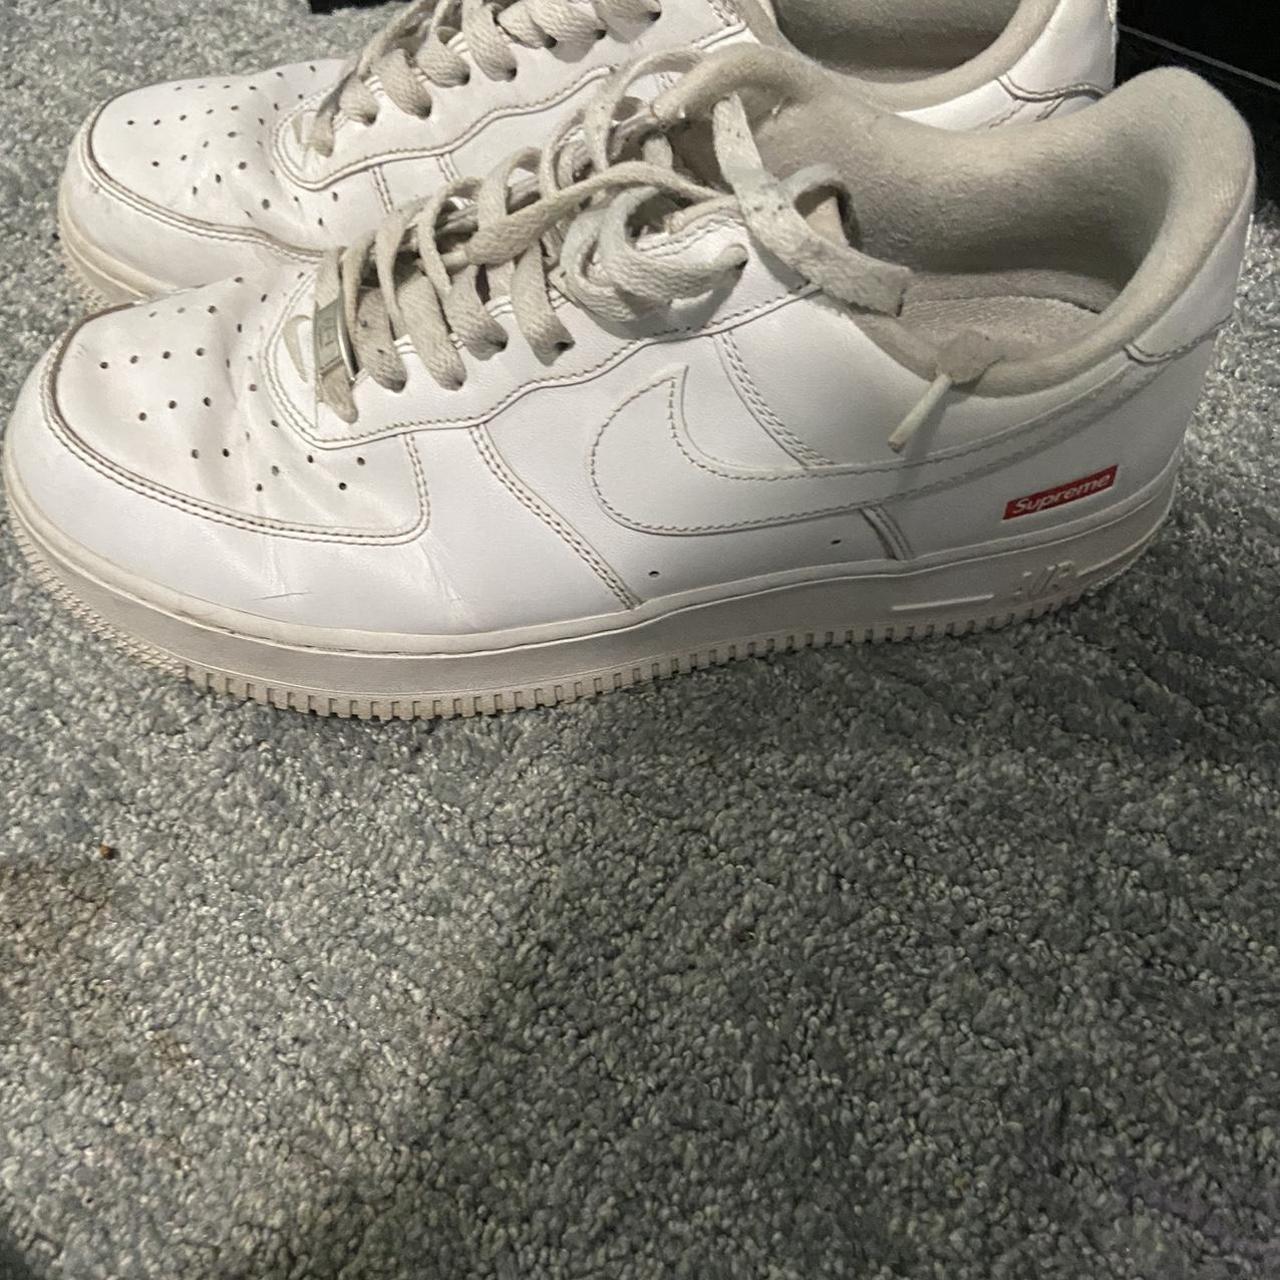 Supreme Men's White and Red Trainers